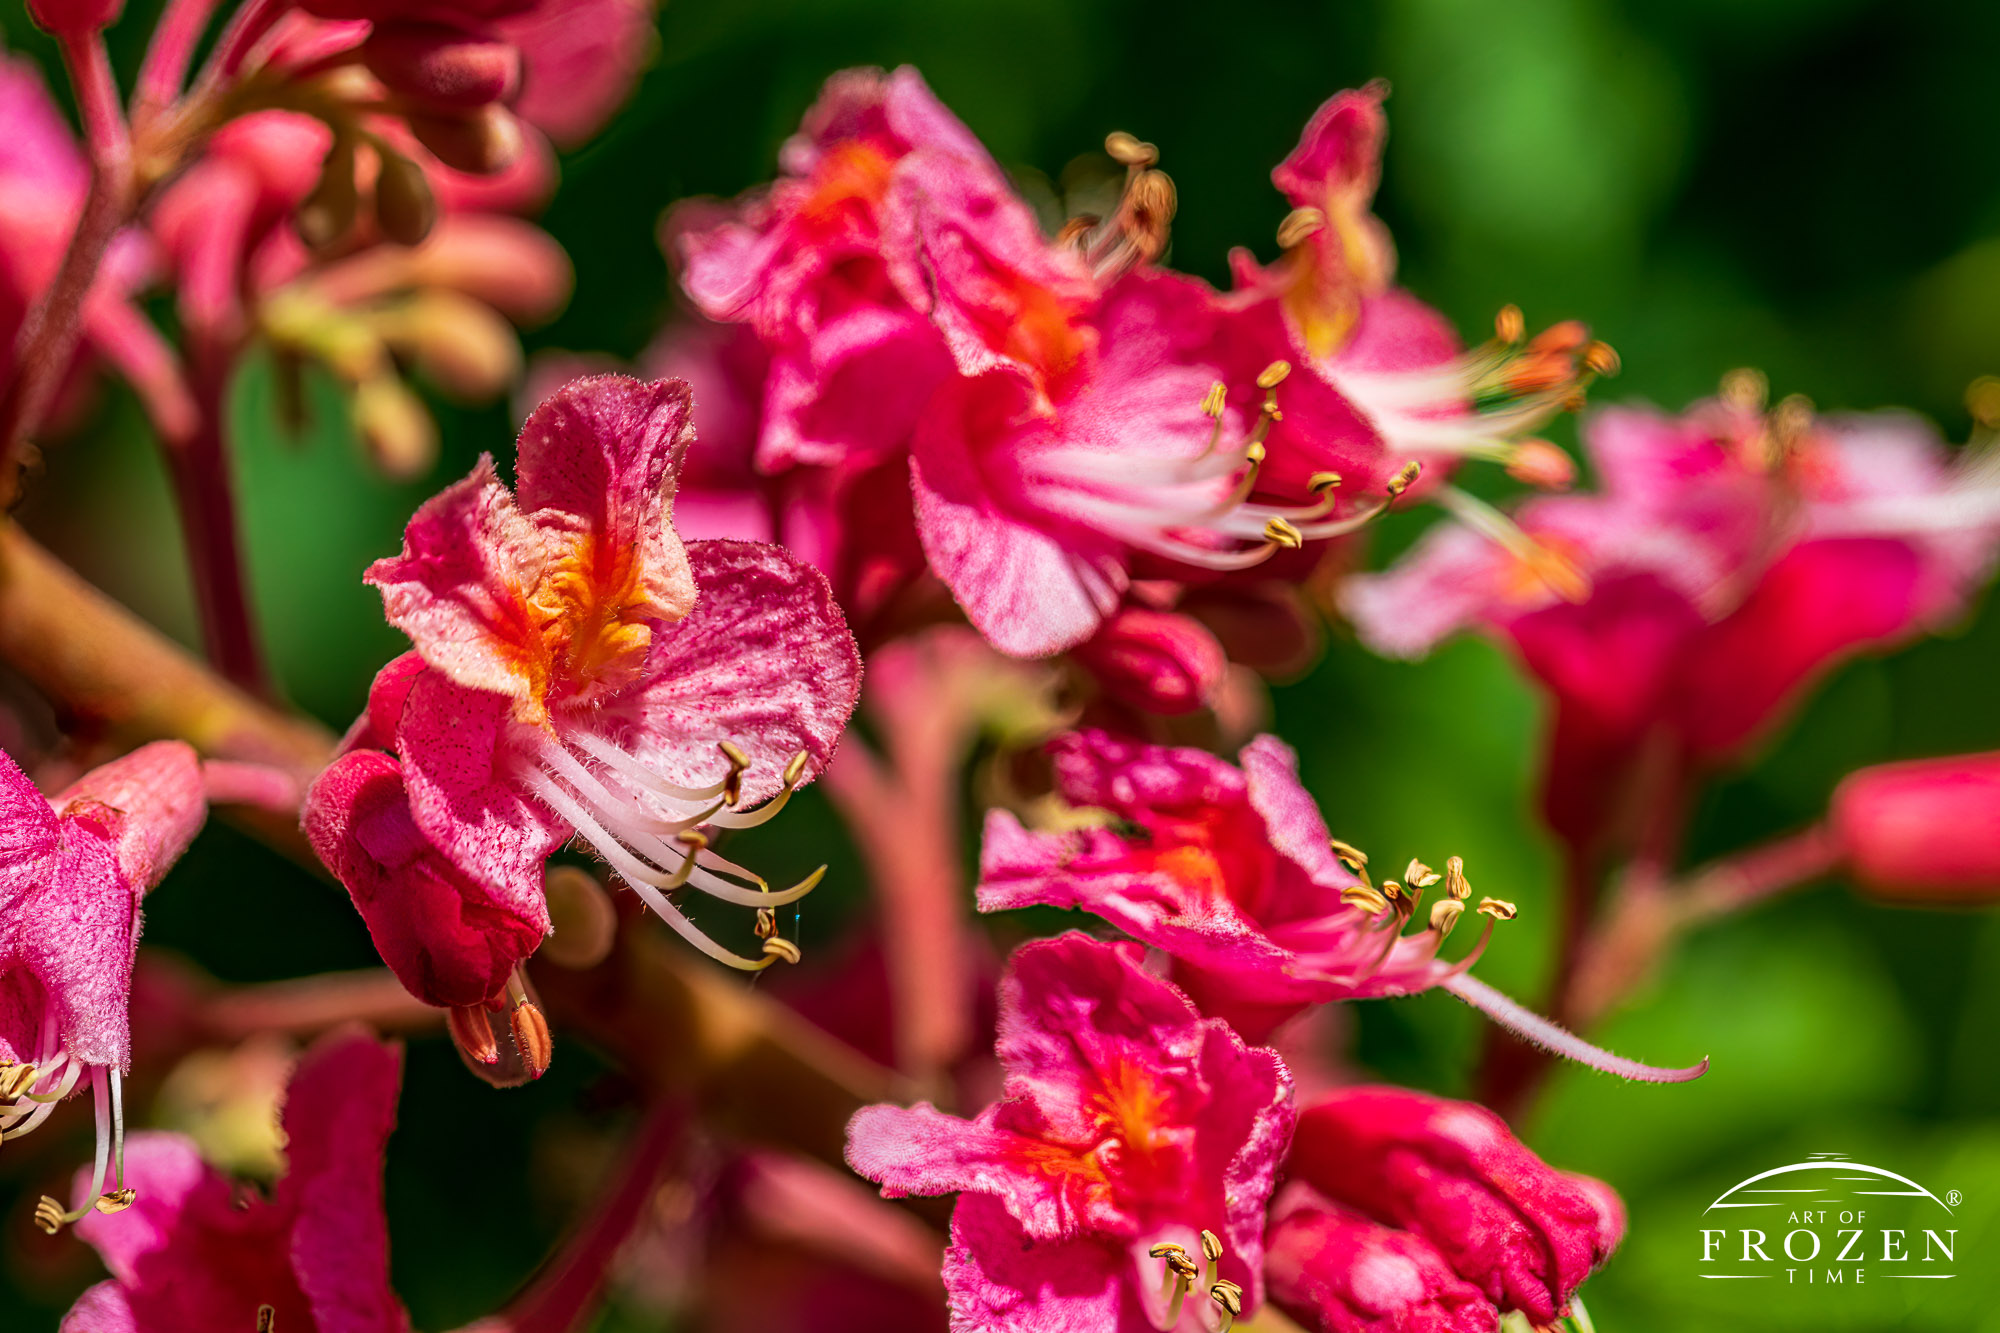 A close view of the Scarlet Buckeye blooms where its stamen are longer than its red petals.